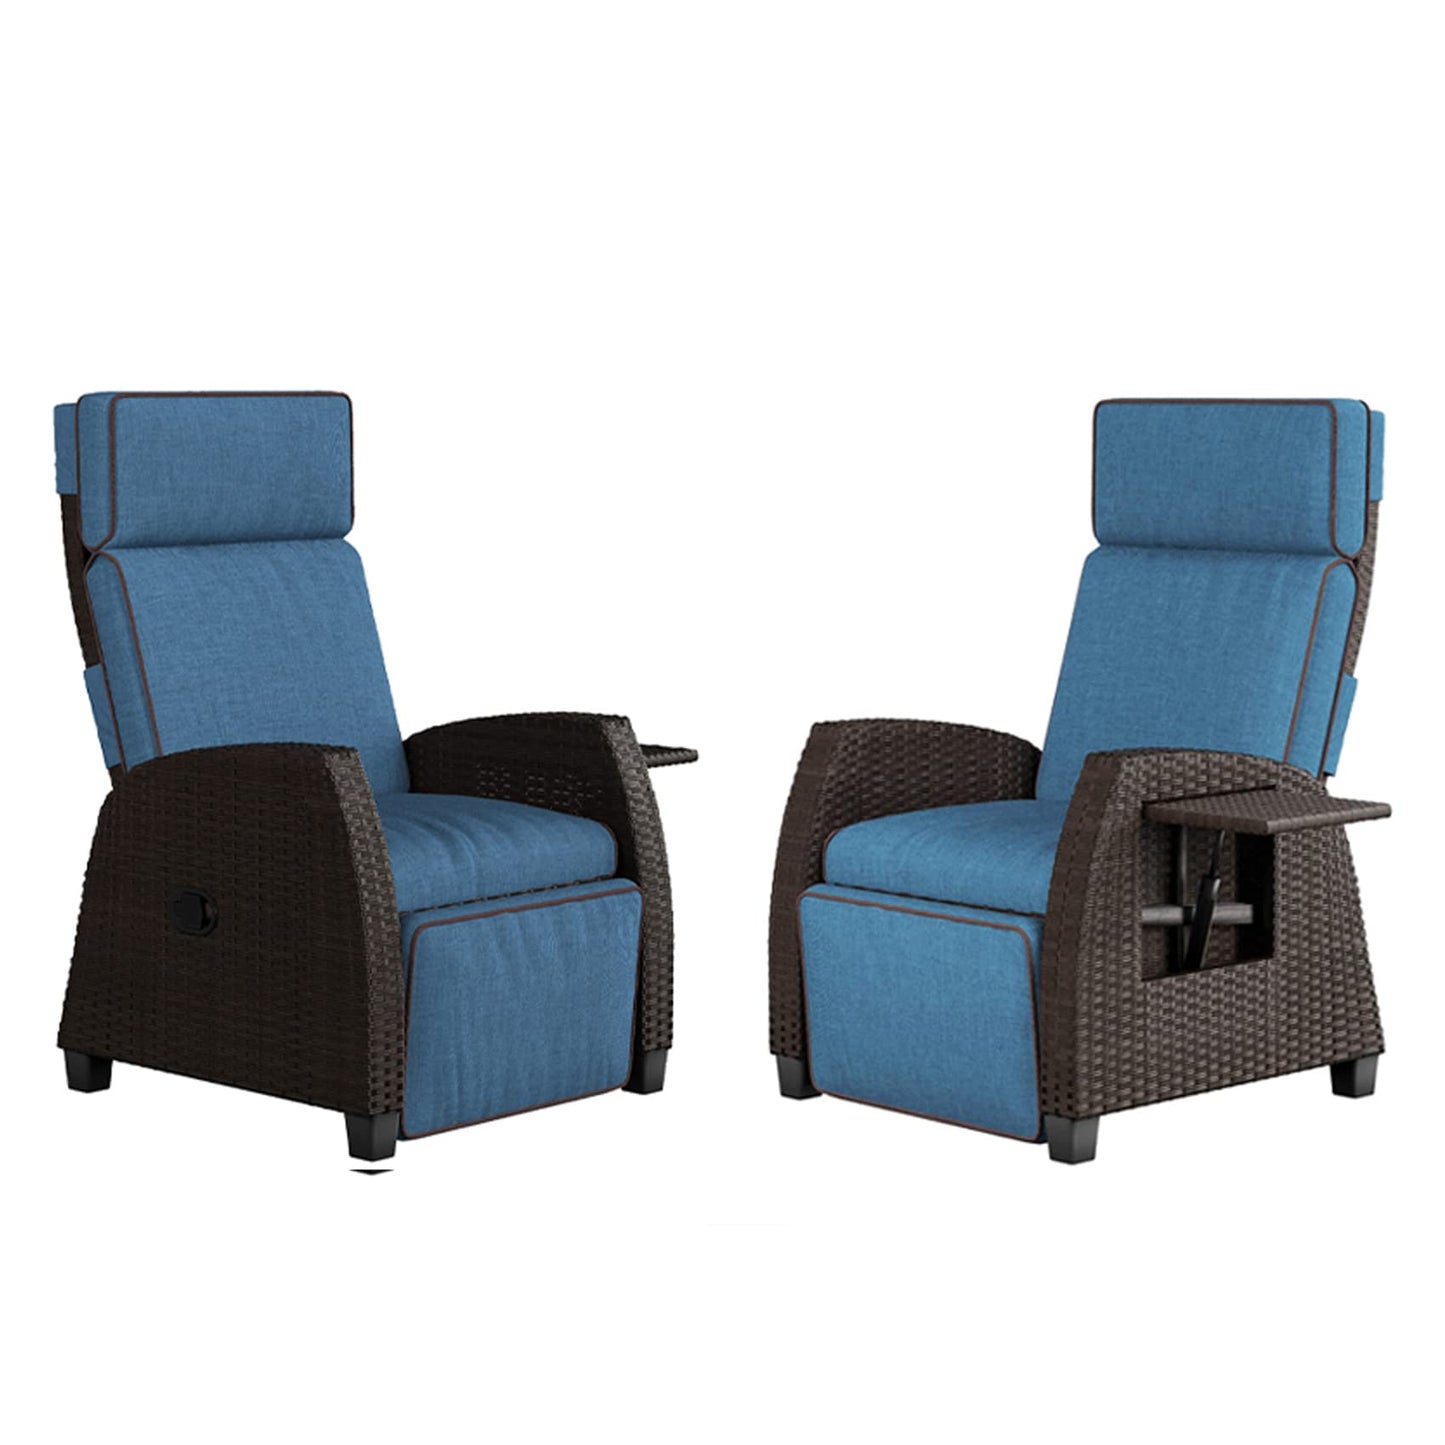 Grand patio Outdoor Recliners Set of 2 Patio Recliner Chair, All-Weather Wicker Reclining Patio Chairs, Flip-up Side Table, Recliner Chair, Peacock Blue Peacock Blue 2pcs 2 PCS